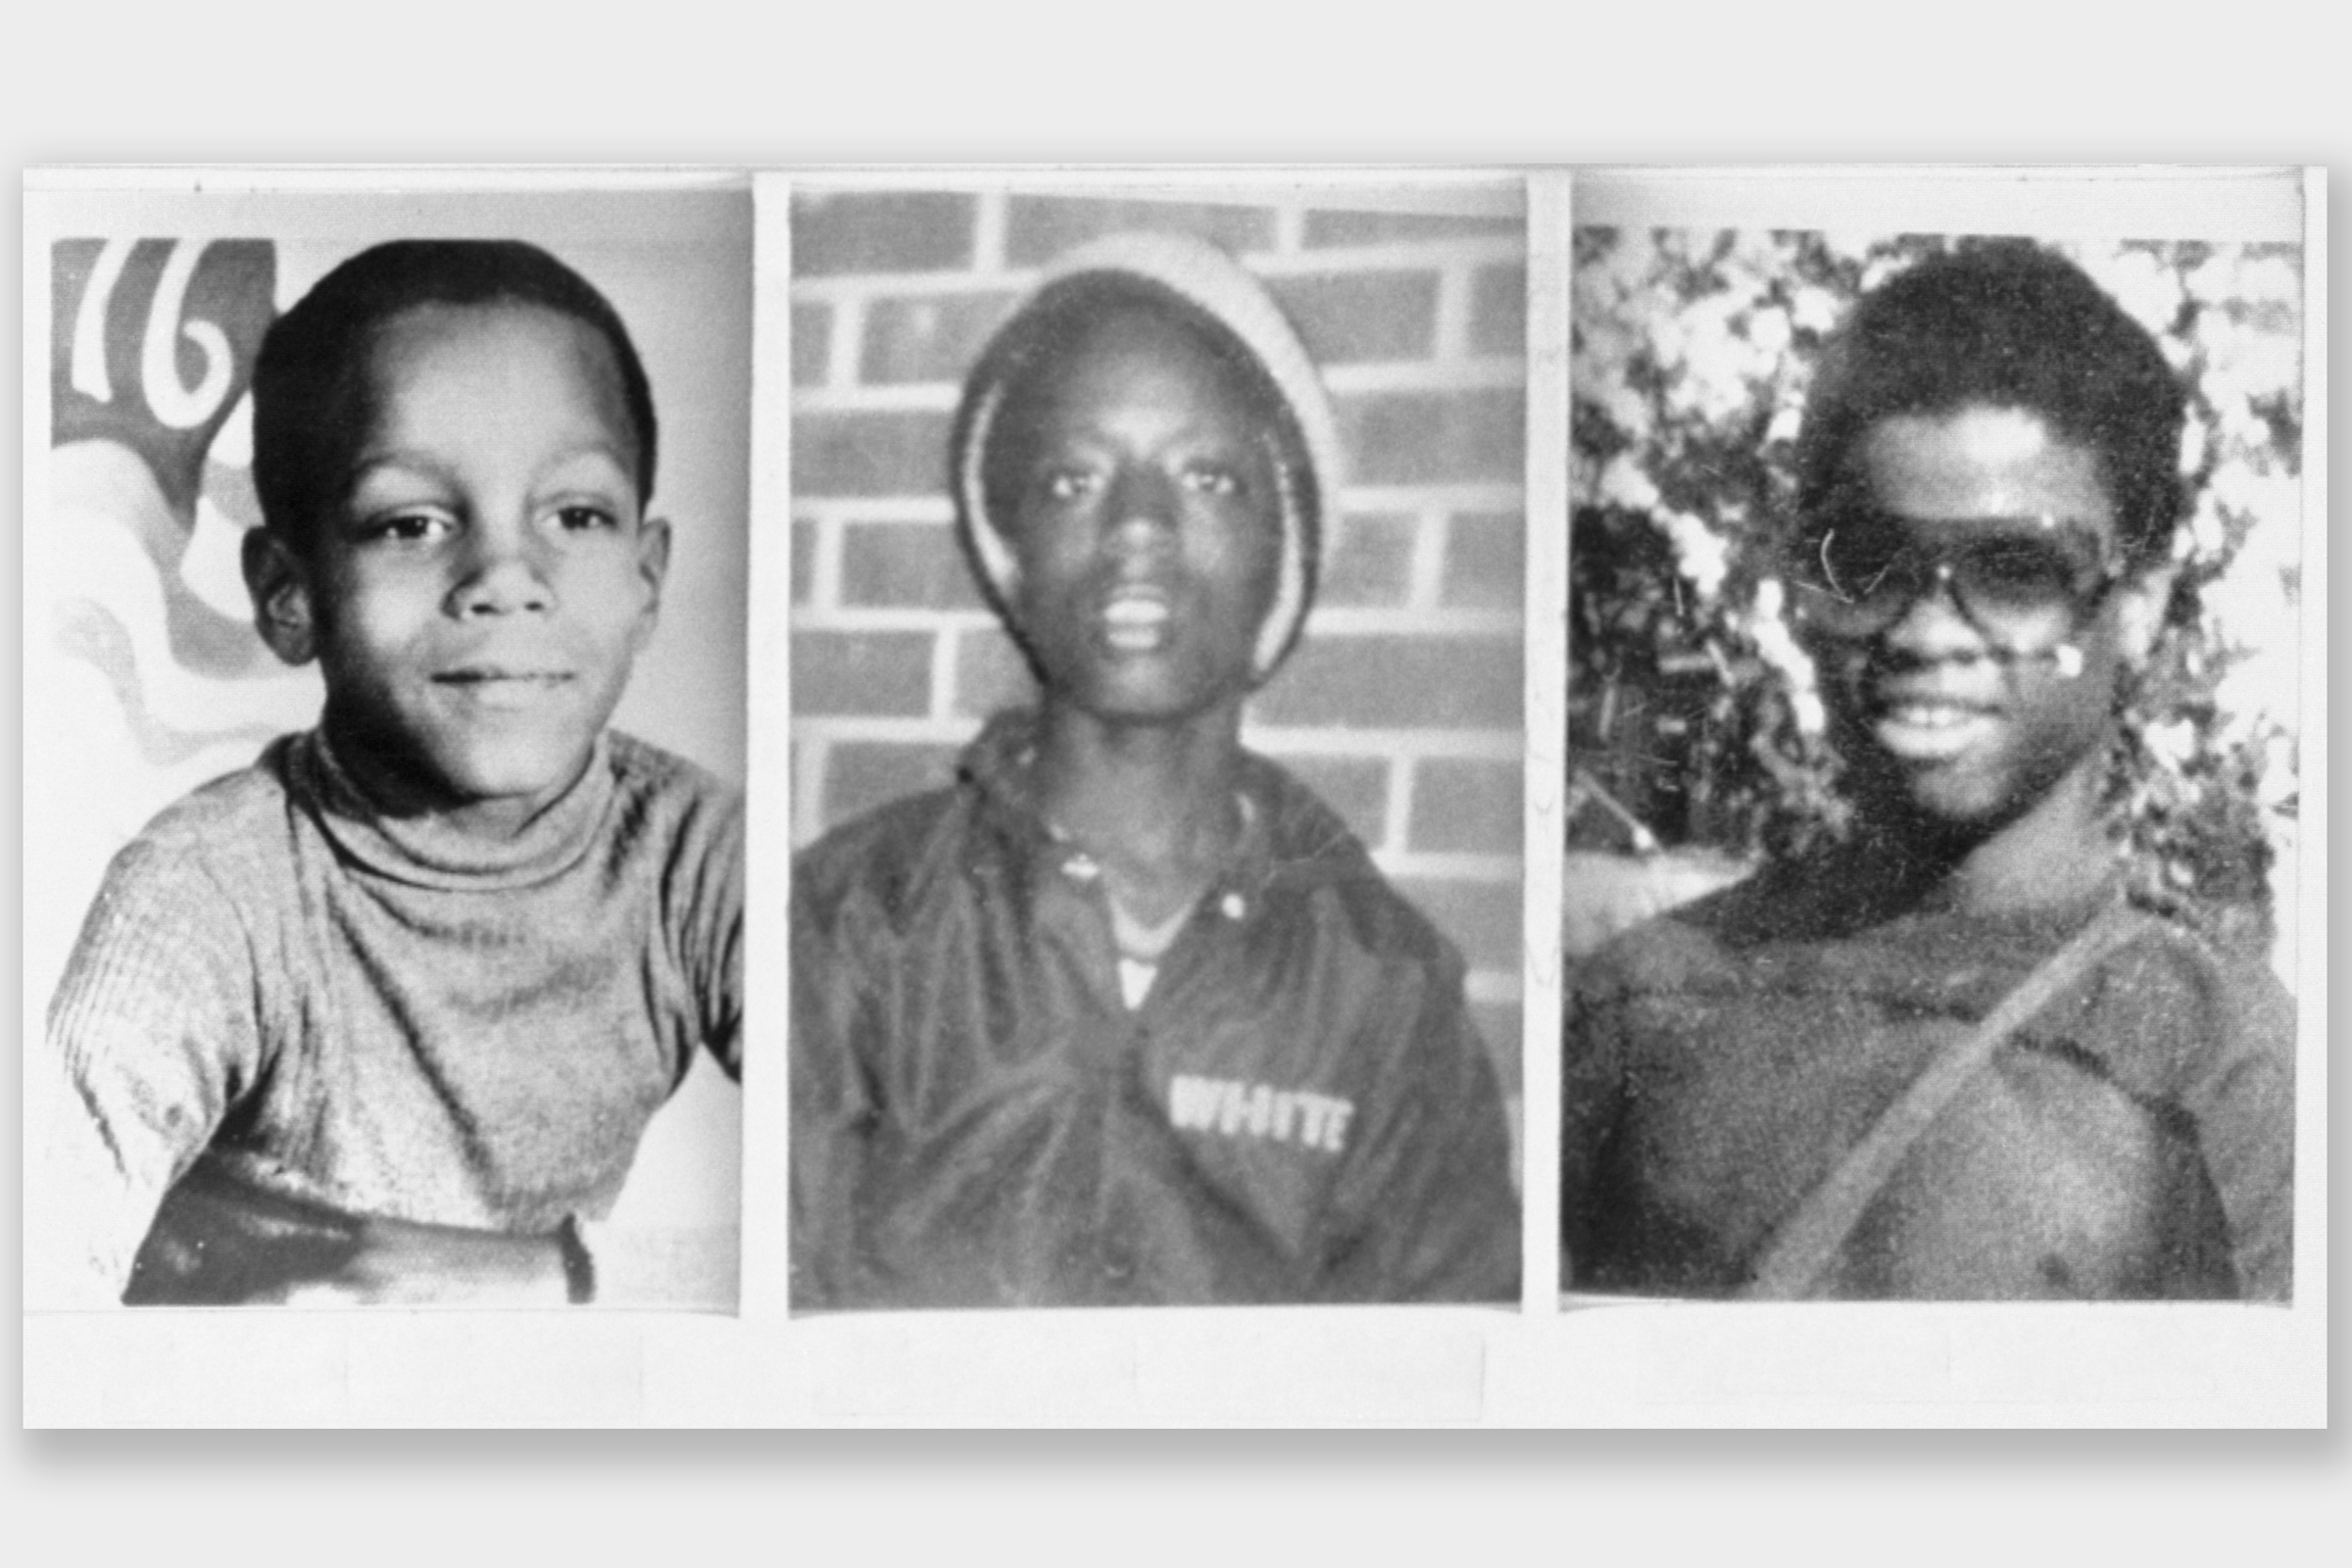 Atlanta child murders case reopened months before mindhunter â rolling stone